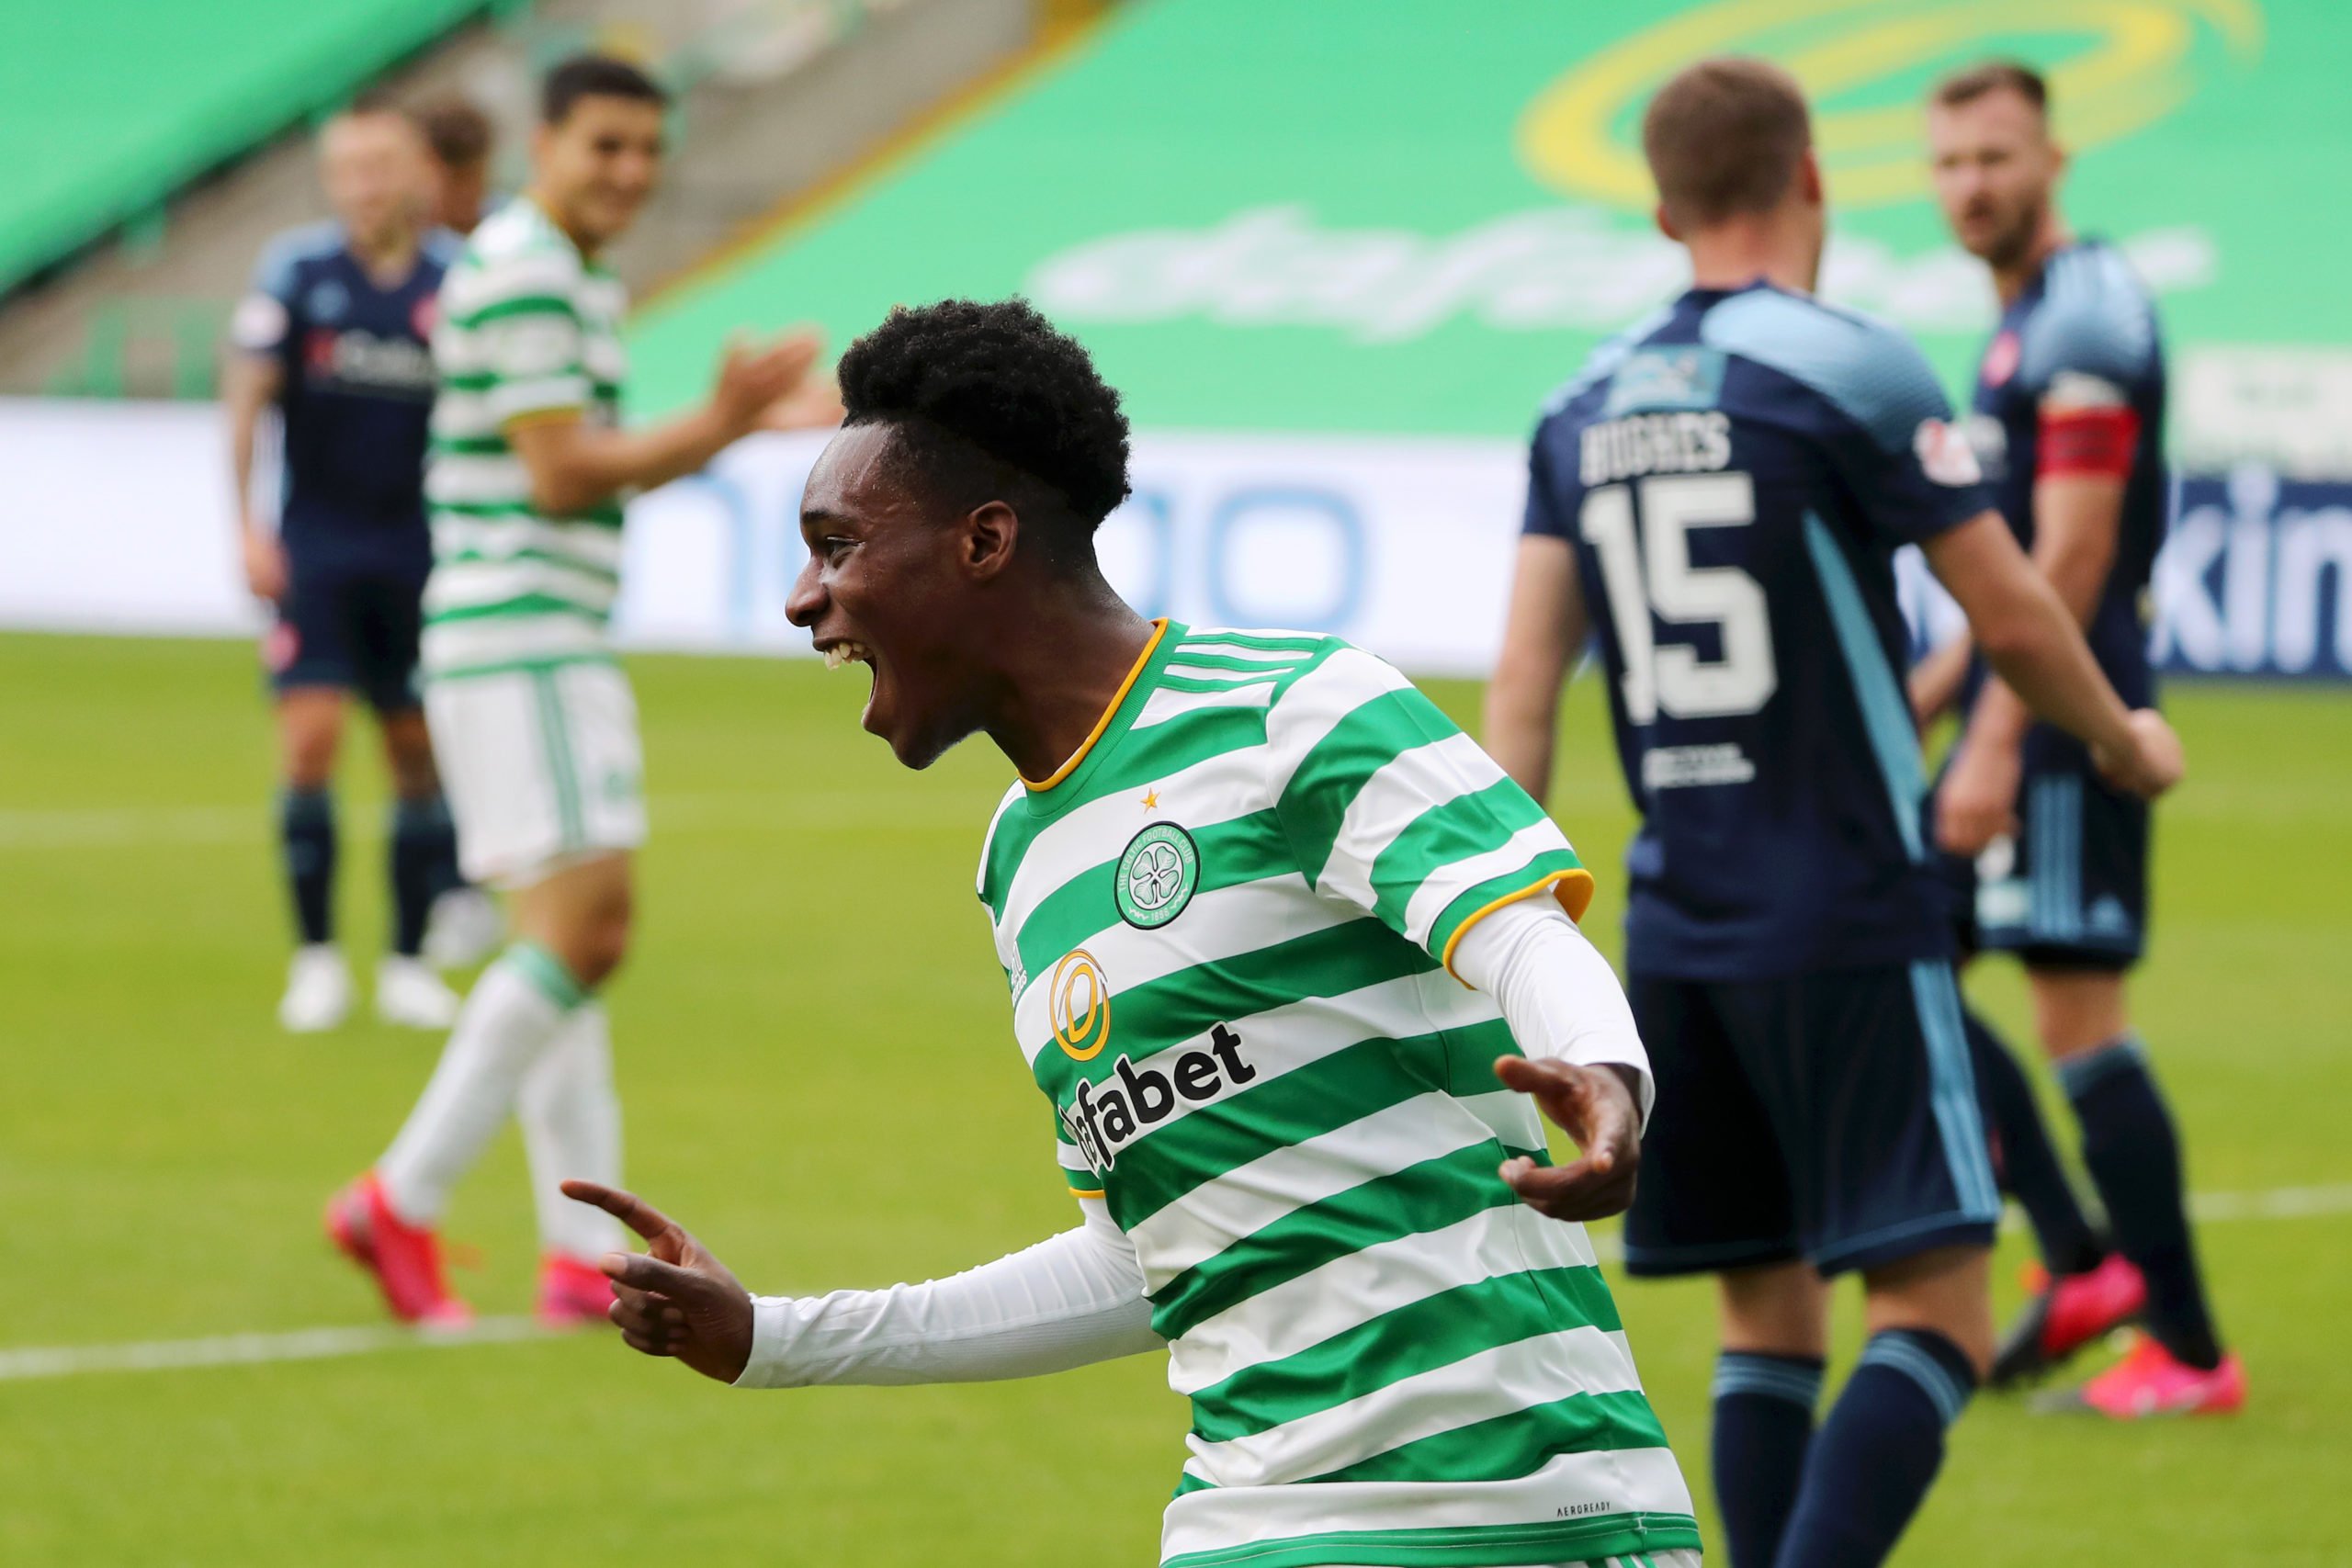 Neil Lennon credits Celtic youngster Jeremie Frimpong in BBC interview